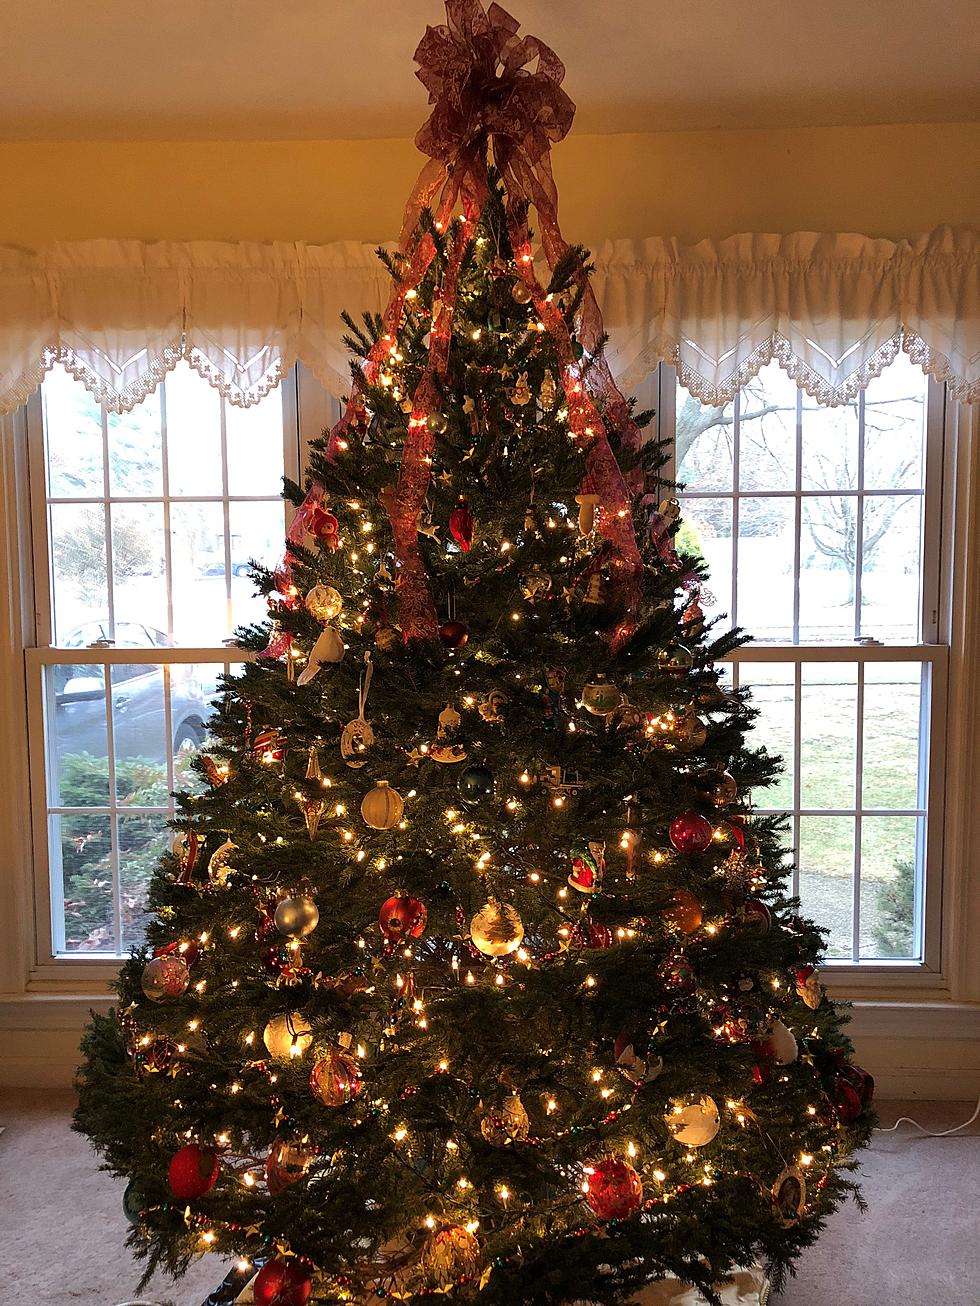 The Heartwarming Story of this Miraculous NJ Christmas Tree